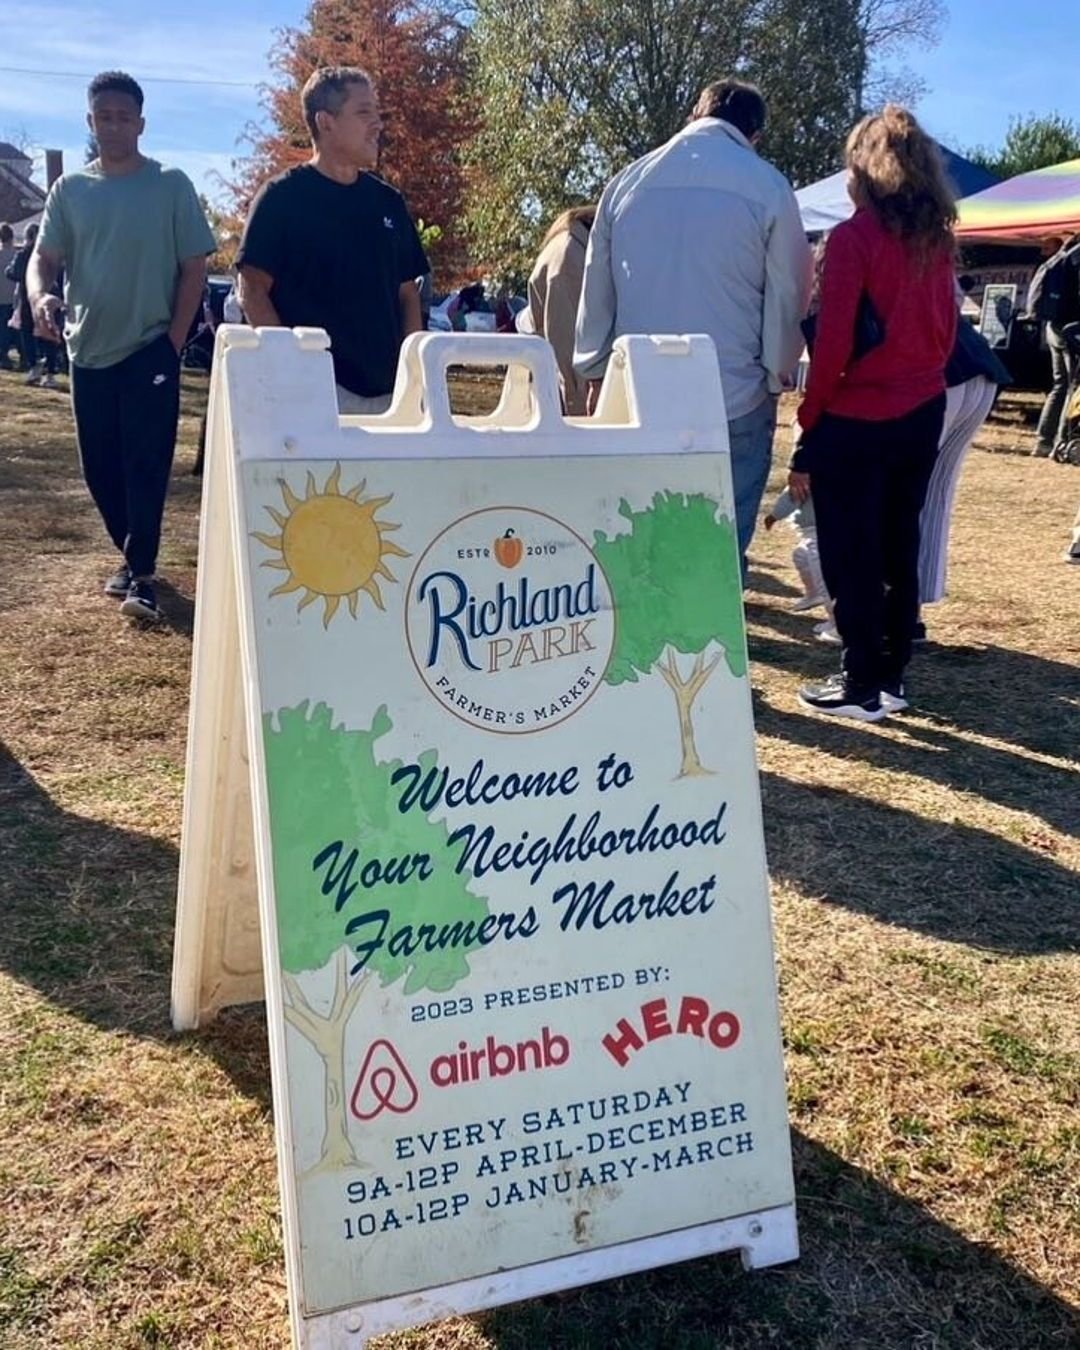 Have you missed us at farmer's markets? Well, we've missed you too!! ❣️ 

That's why we are happy to say we will be back to our normal market schedule every Saturday at @richlandparkfarmersmarket. Join us bright and early to catch all your favorites 